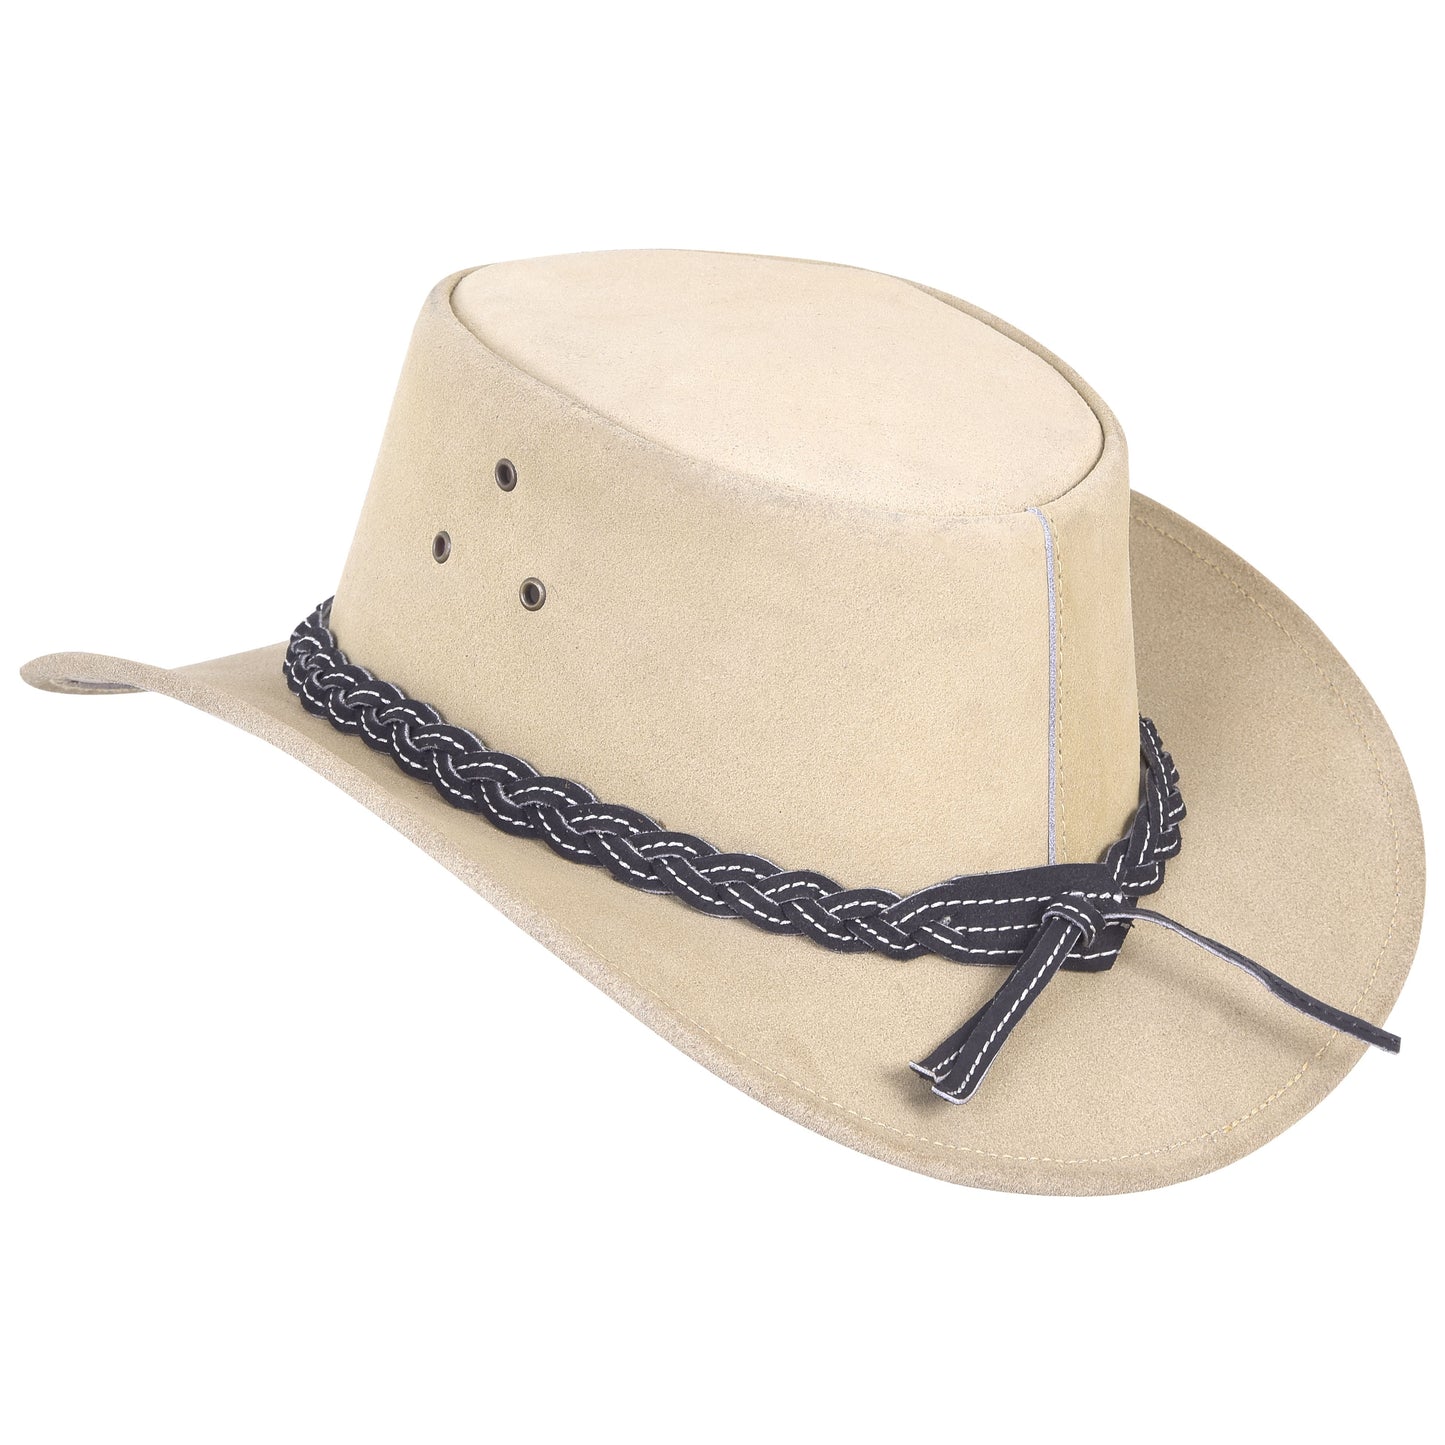 Western Leather Cowboy Hat with Braided Hat Band Australian Leather Hat